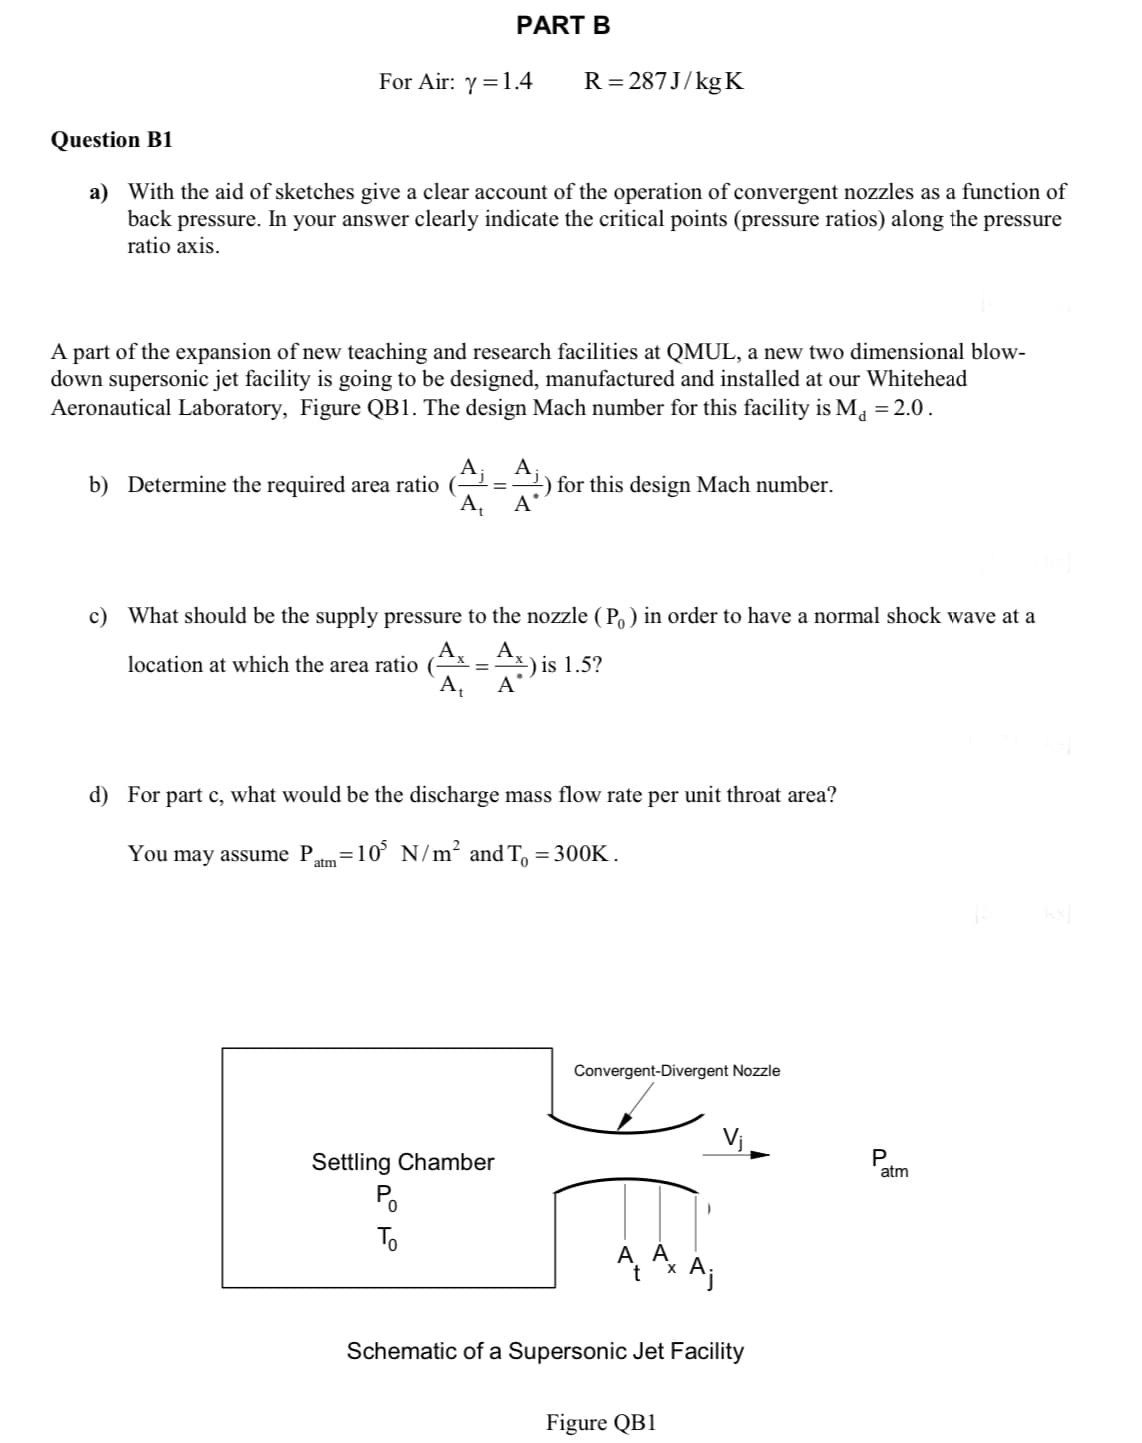 For Air: y = 1.4
PART B
Question B1
a) With the aid of sketches give a clear account of the operation of convergent nozzles as a function of
back pressure. In your answer clearly indicate the critical points (pressure ratios) along the pressure
ratio axis.
b) Determine the required area ratio
A part of the expansion of new teaching and research facilities at QMUL, a new two dimensional blow-
down supersonic jet facility is going to be designed, manufactured and installed at our Whitehead
Aeronautical Laboratory, Figure QB1. The design Mach number for this facility is M₁ = 2.0.
A
=
A₁ A
R=287J/kg K
A₁
location at which the area ratio (
A₁
c) What should be the supply pressure to the nozzle (P) in order to have a normal shock wave at a
Ax
=) is 1.5?
A
Settling Chamber
Po
To
for this design Mach number.
d) For part c, what would be the discharge mass flow rate per unit throat area?
You may assume P =105 N/m² and To = 300K.
atm
Convergent-Divergent Nozzle
A AX
Schematic of a Supersonic Jet Facility
Figure QB1
P
atm